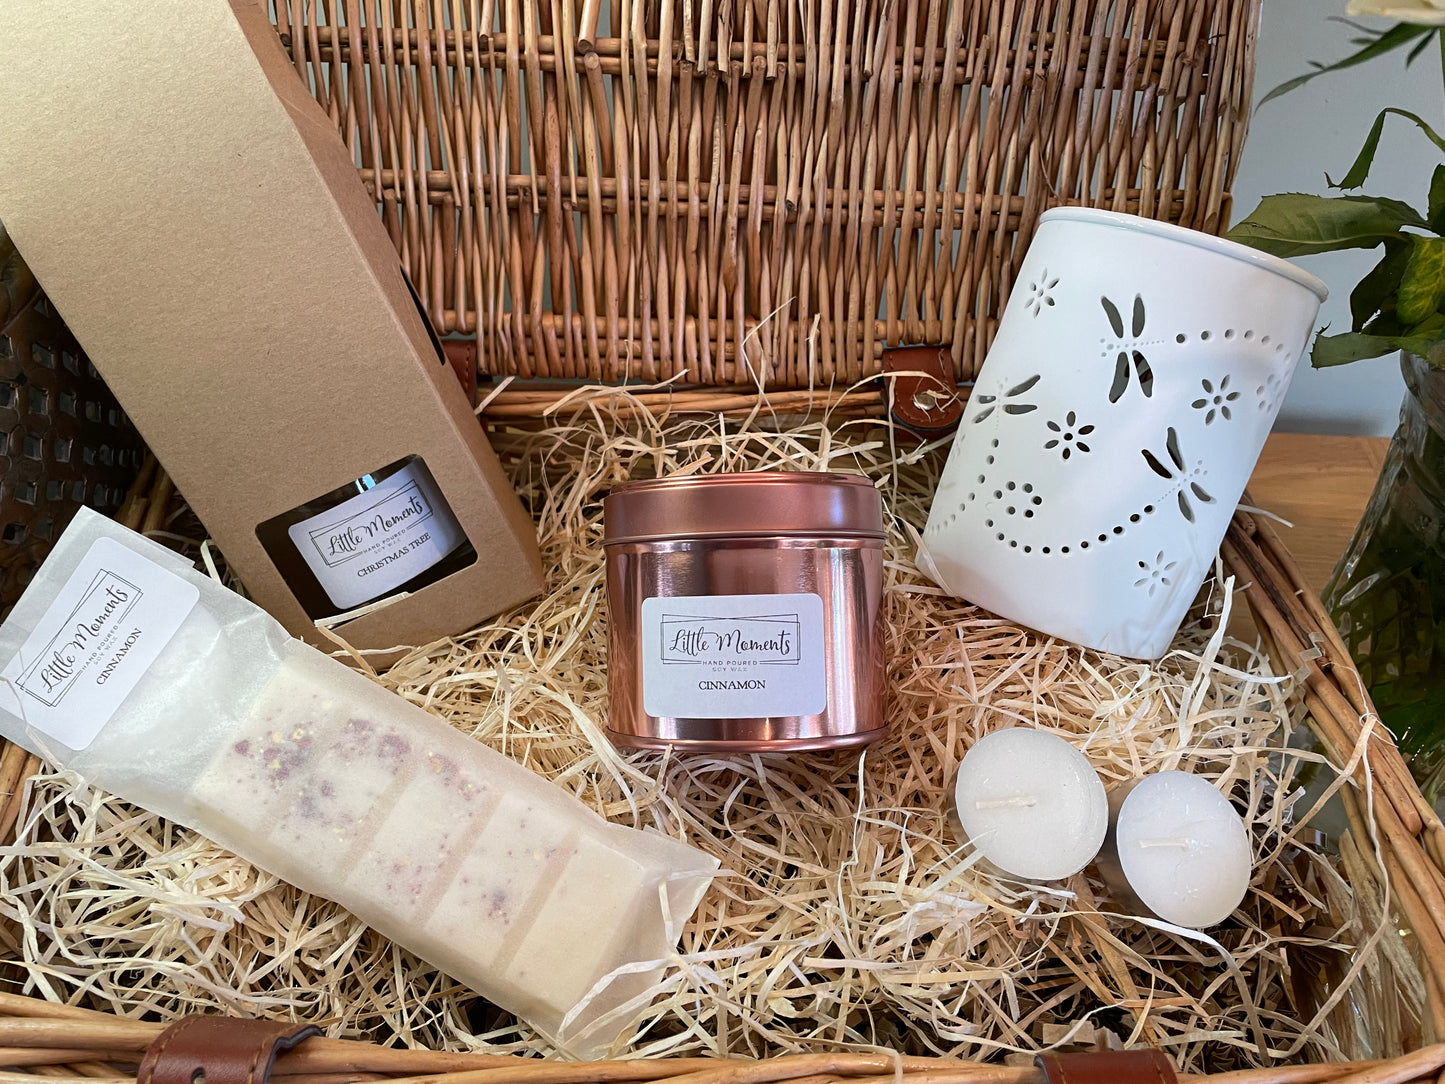 luxury wicker gift hamper with a reed diffuser 20cl fragrance candle in rose gold tin, wax melt snap bar and a dragonfly ceramic wax melt burner